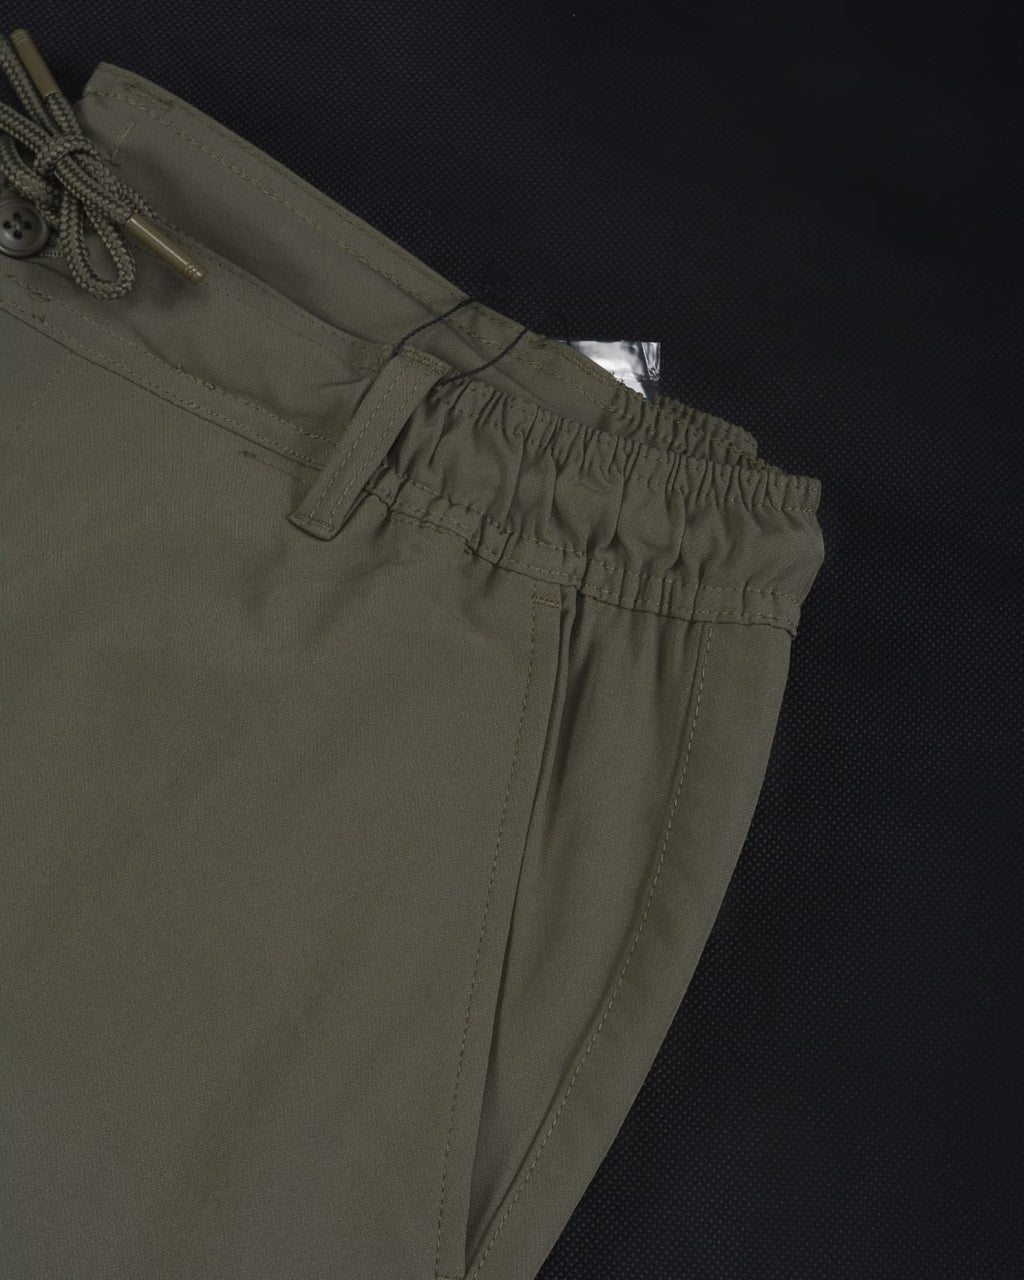 PacificBlue  Sweatpant Jogger Cargo Pants Olive